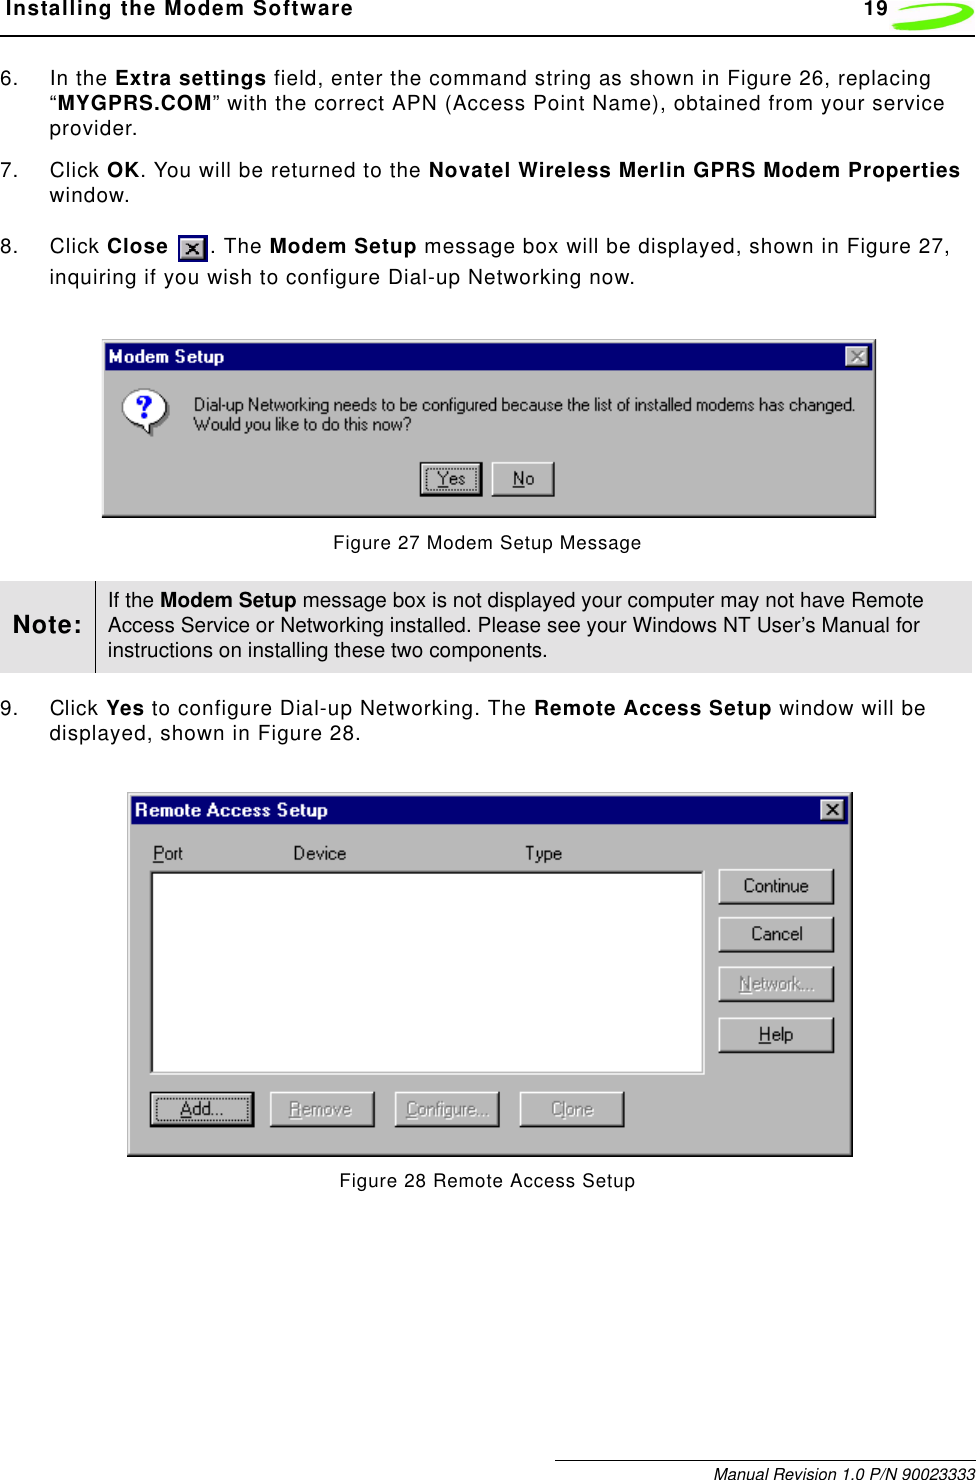  Installing the Modem Software 19Manual Revision 1.0 P/N 900233336. In the Extra settings field, enter the command string as shown in Figure 26, replacing “MYGPRS.COM” with the correct APN (Access Point Name), obtained from your service provider.7. Click OK. You will be returned to the Novatel Wireless Merlin GPRS Modem Properties window.8. Click Close  . The Modem Setup message box will be displayed, shown in Figure 27, inquiring if you wish to configure Dial-up Networking now.Figure 27 Modem Setup Message9. Click Yes to configure Dial-up Networking. The Remote Access Setup window will be displayed, shown in Figure 28.Figure 28 Remote Access SetupNote: If the Modem Setup message box is not displayed your computer may not have Remote Access Service or Networking installed. Please see your Windows NT User’s Manual for instructions on installing these two components.